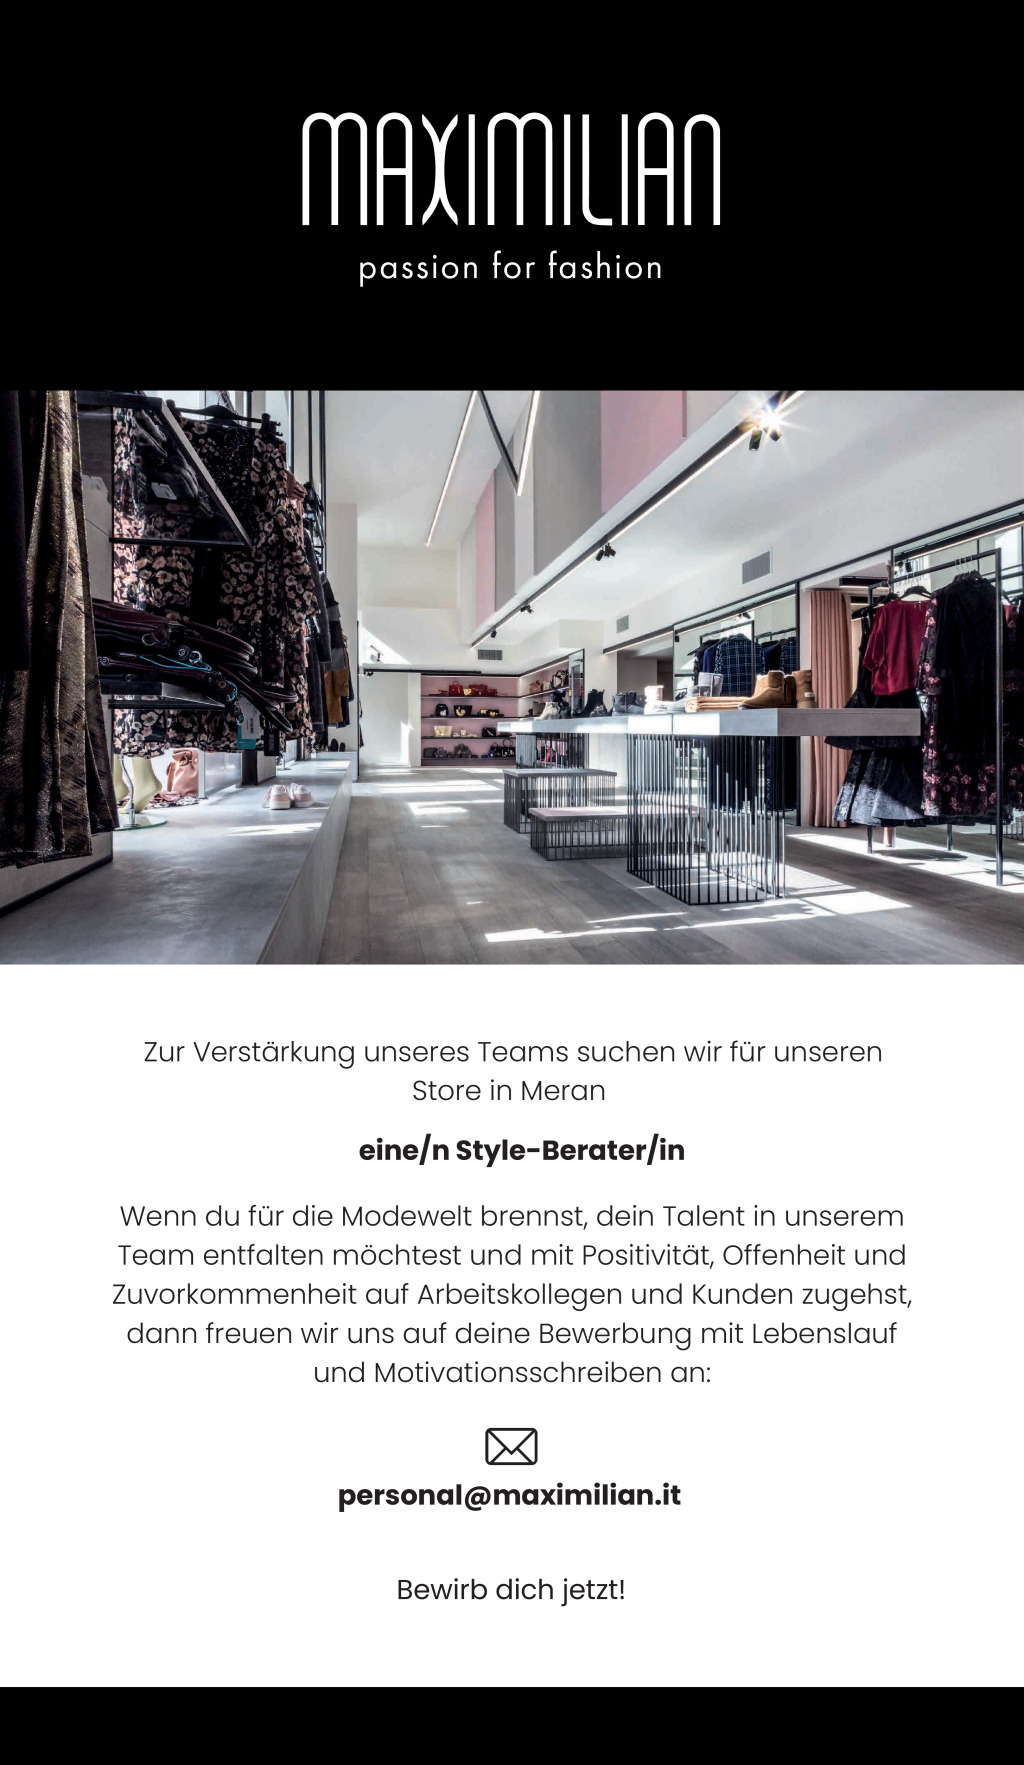 Style-Berater*in